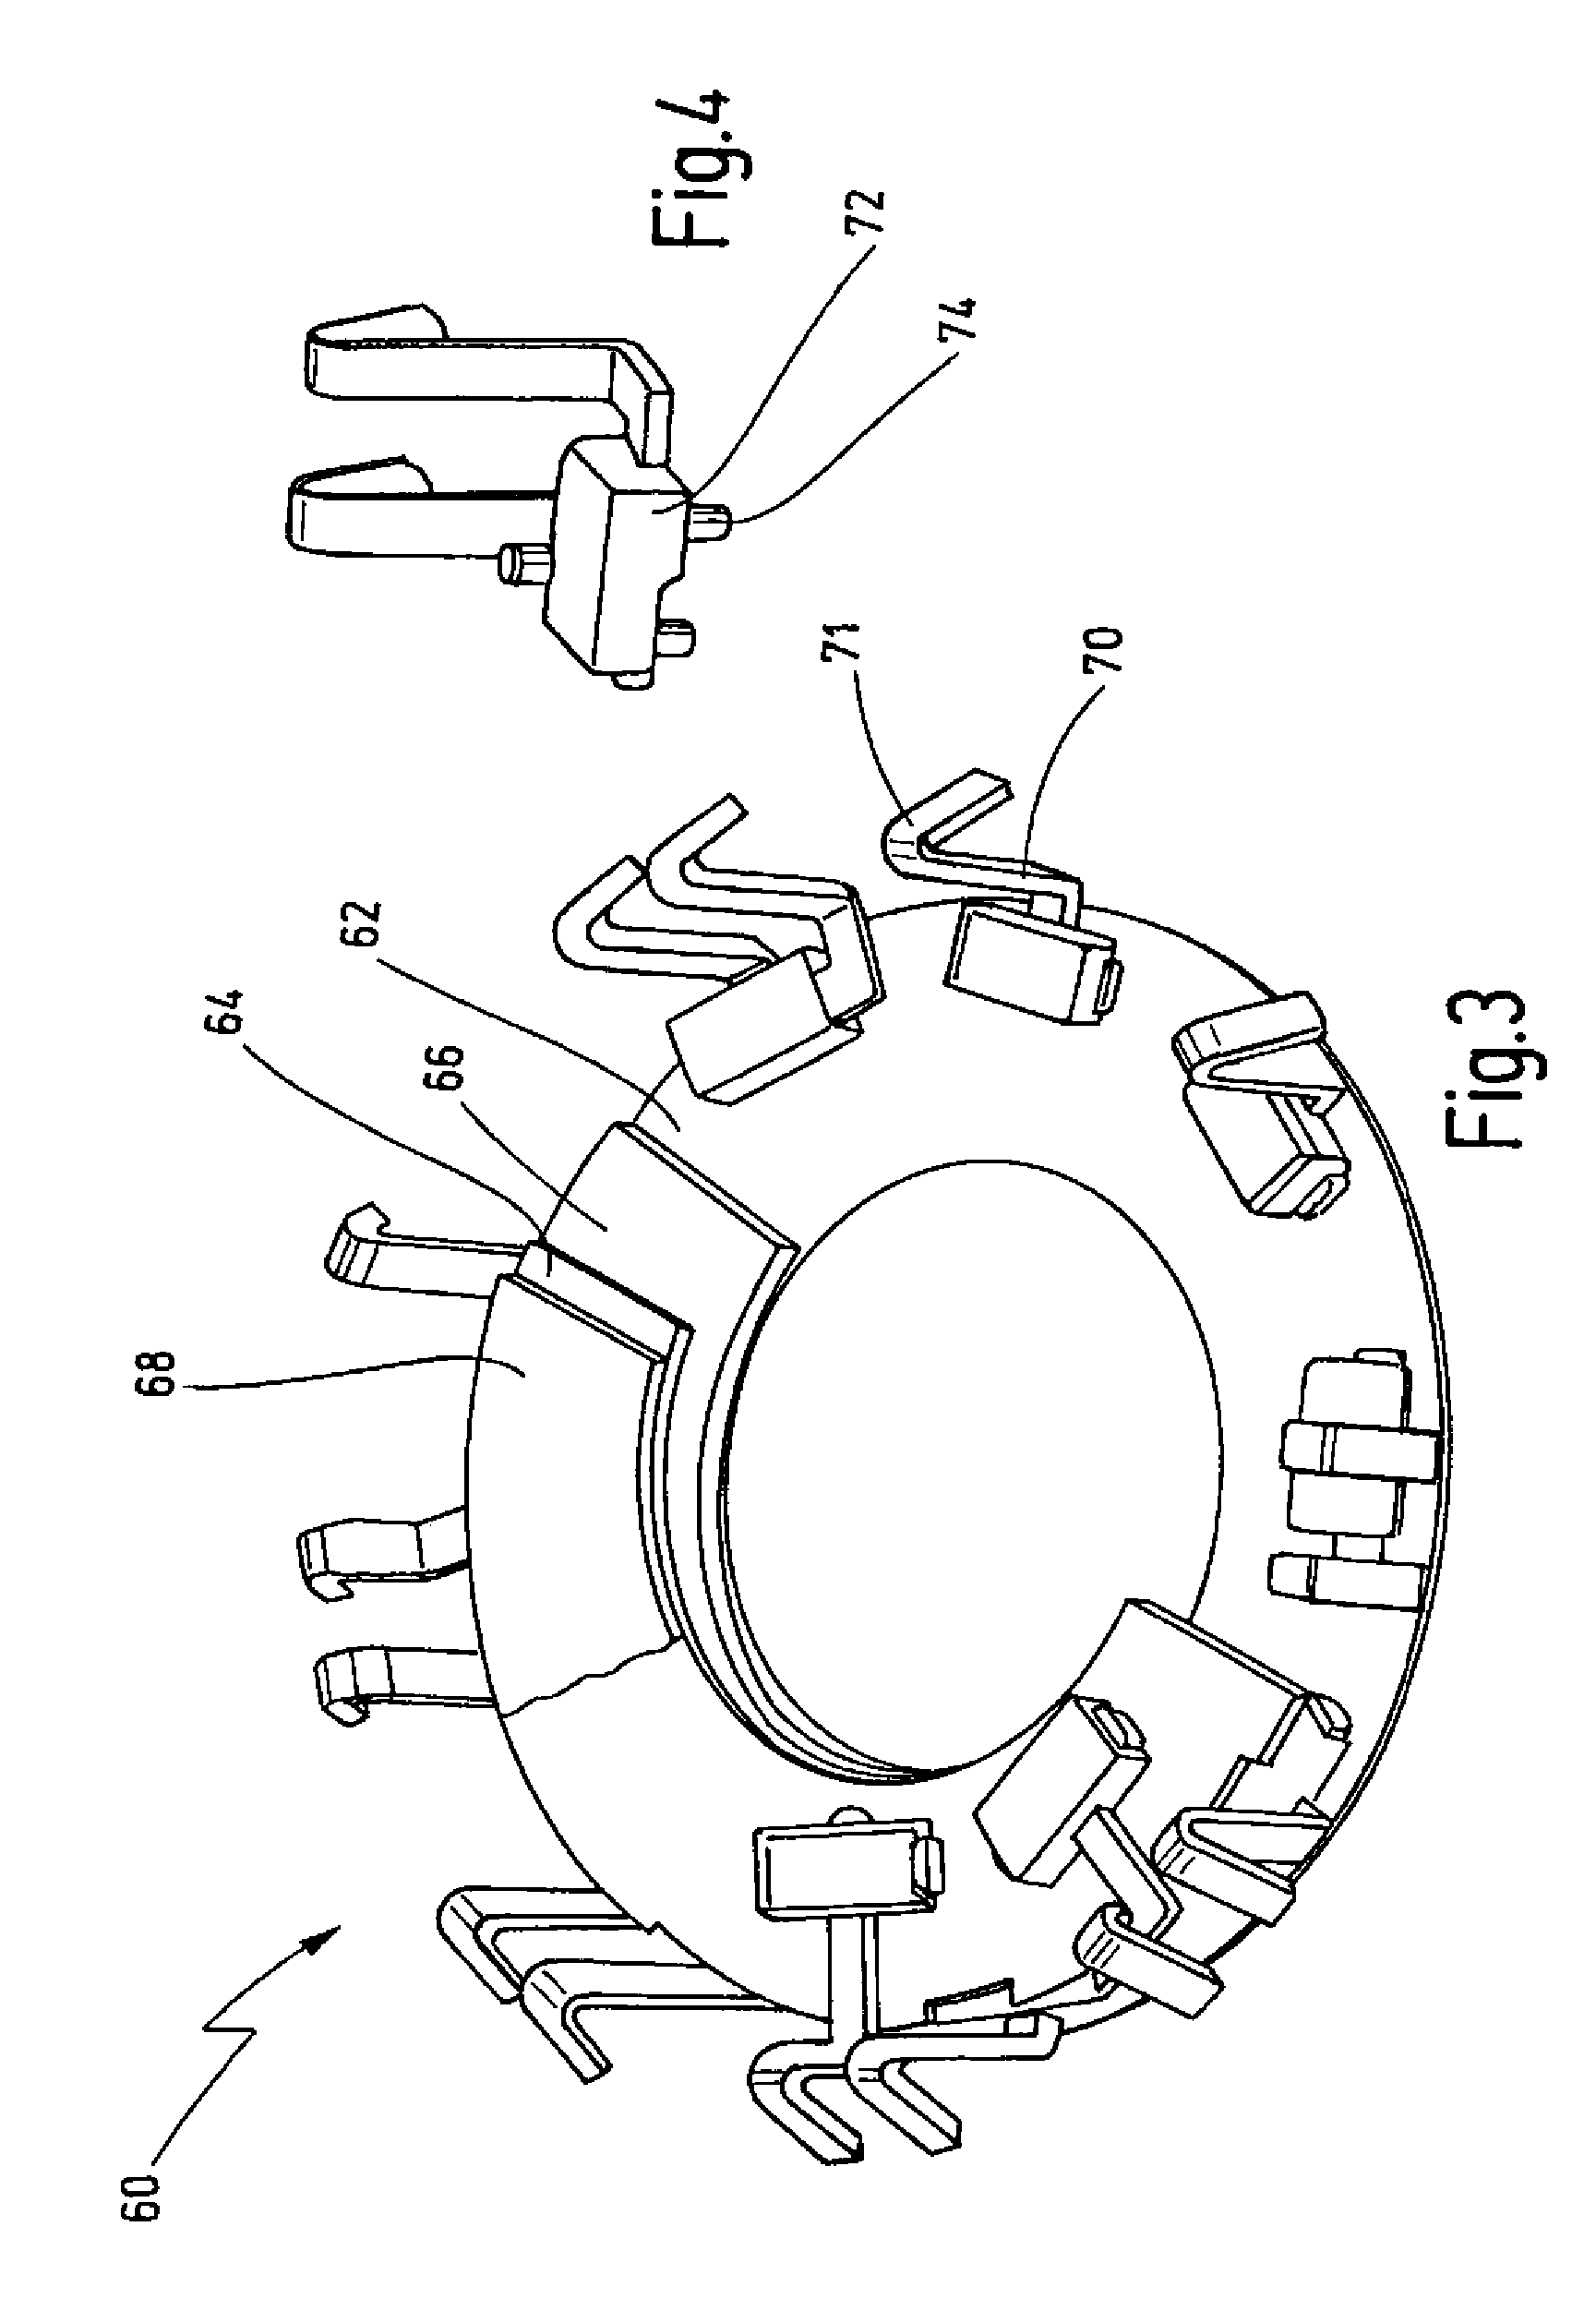 Electric motor having electrical connector rack